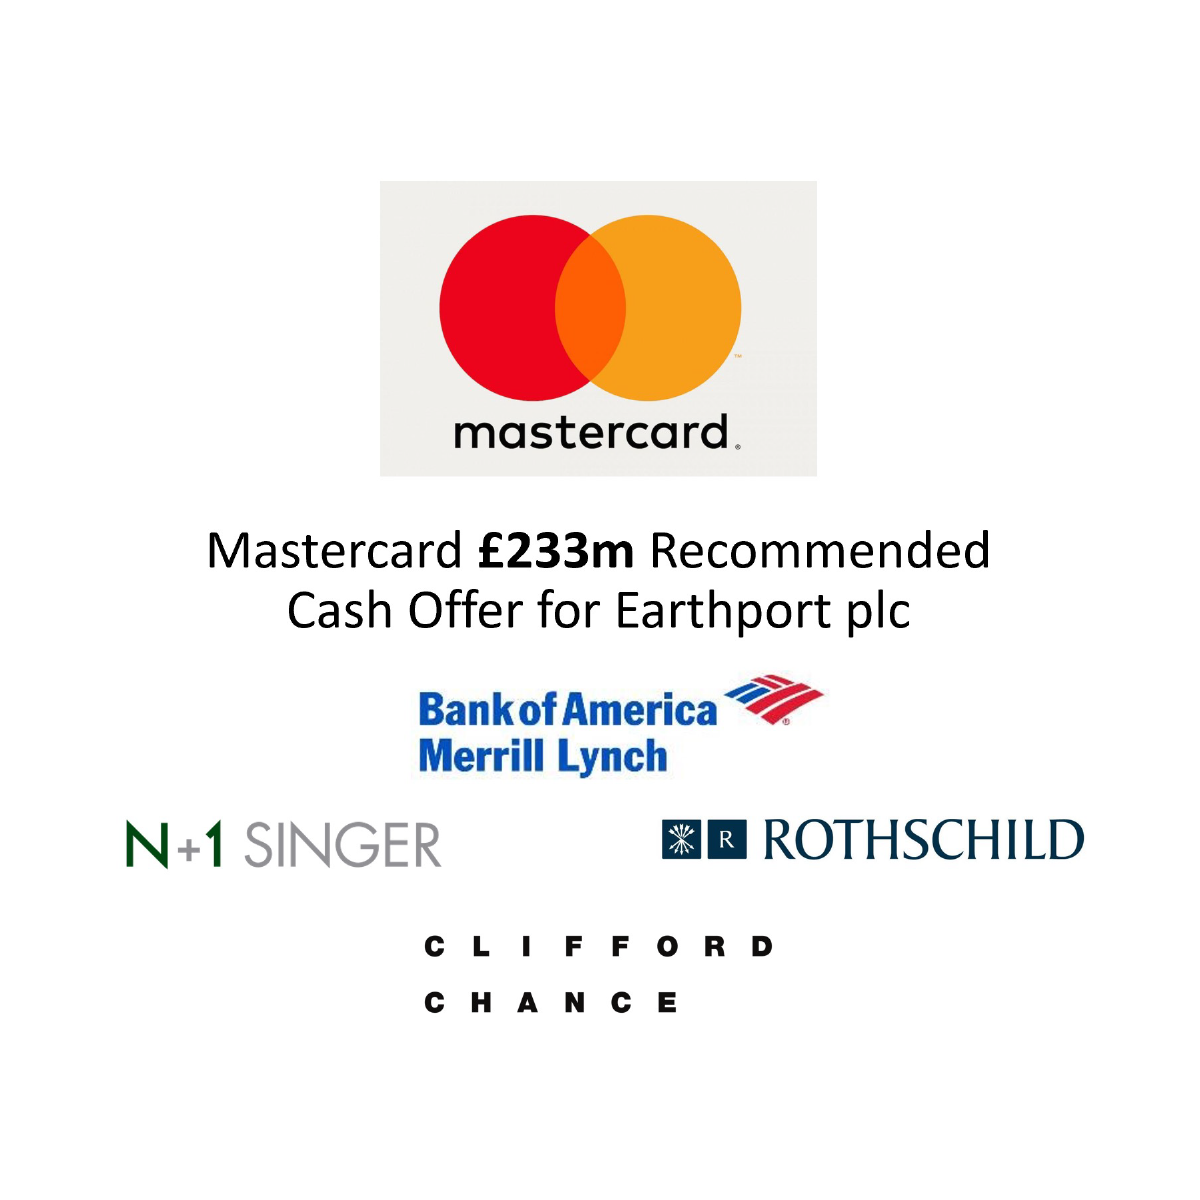 Mastercard £233m Recommended Cash Offer for Earthport plc